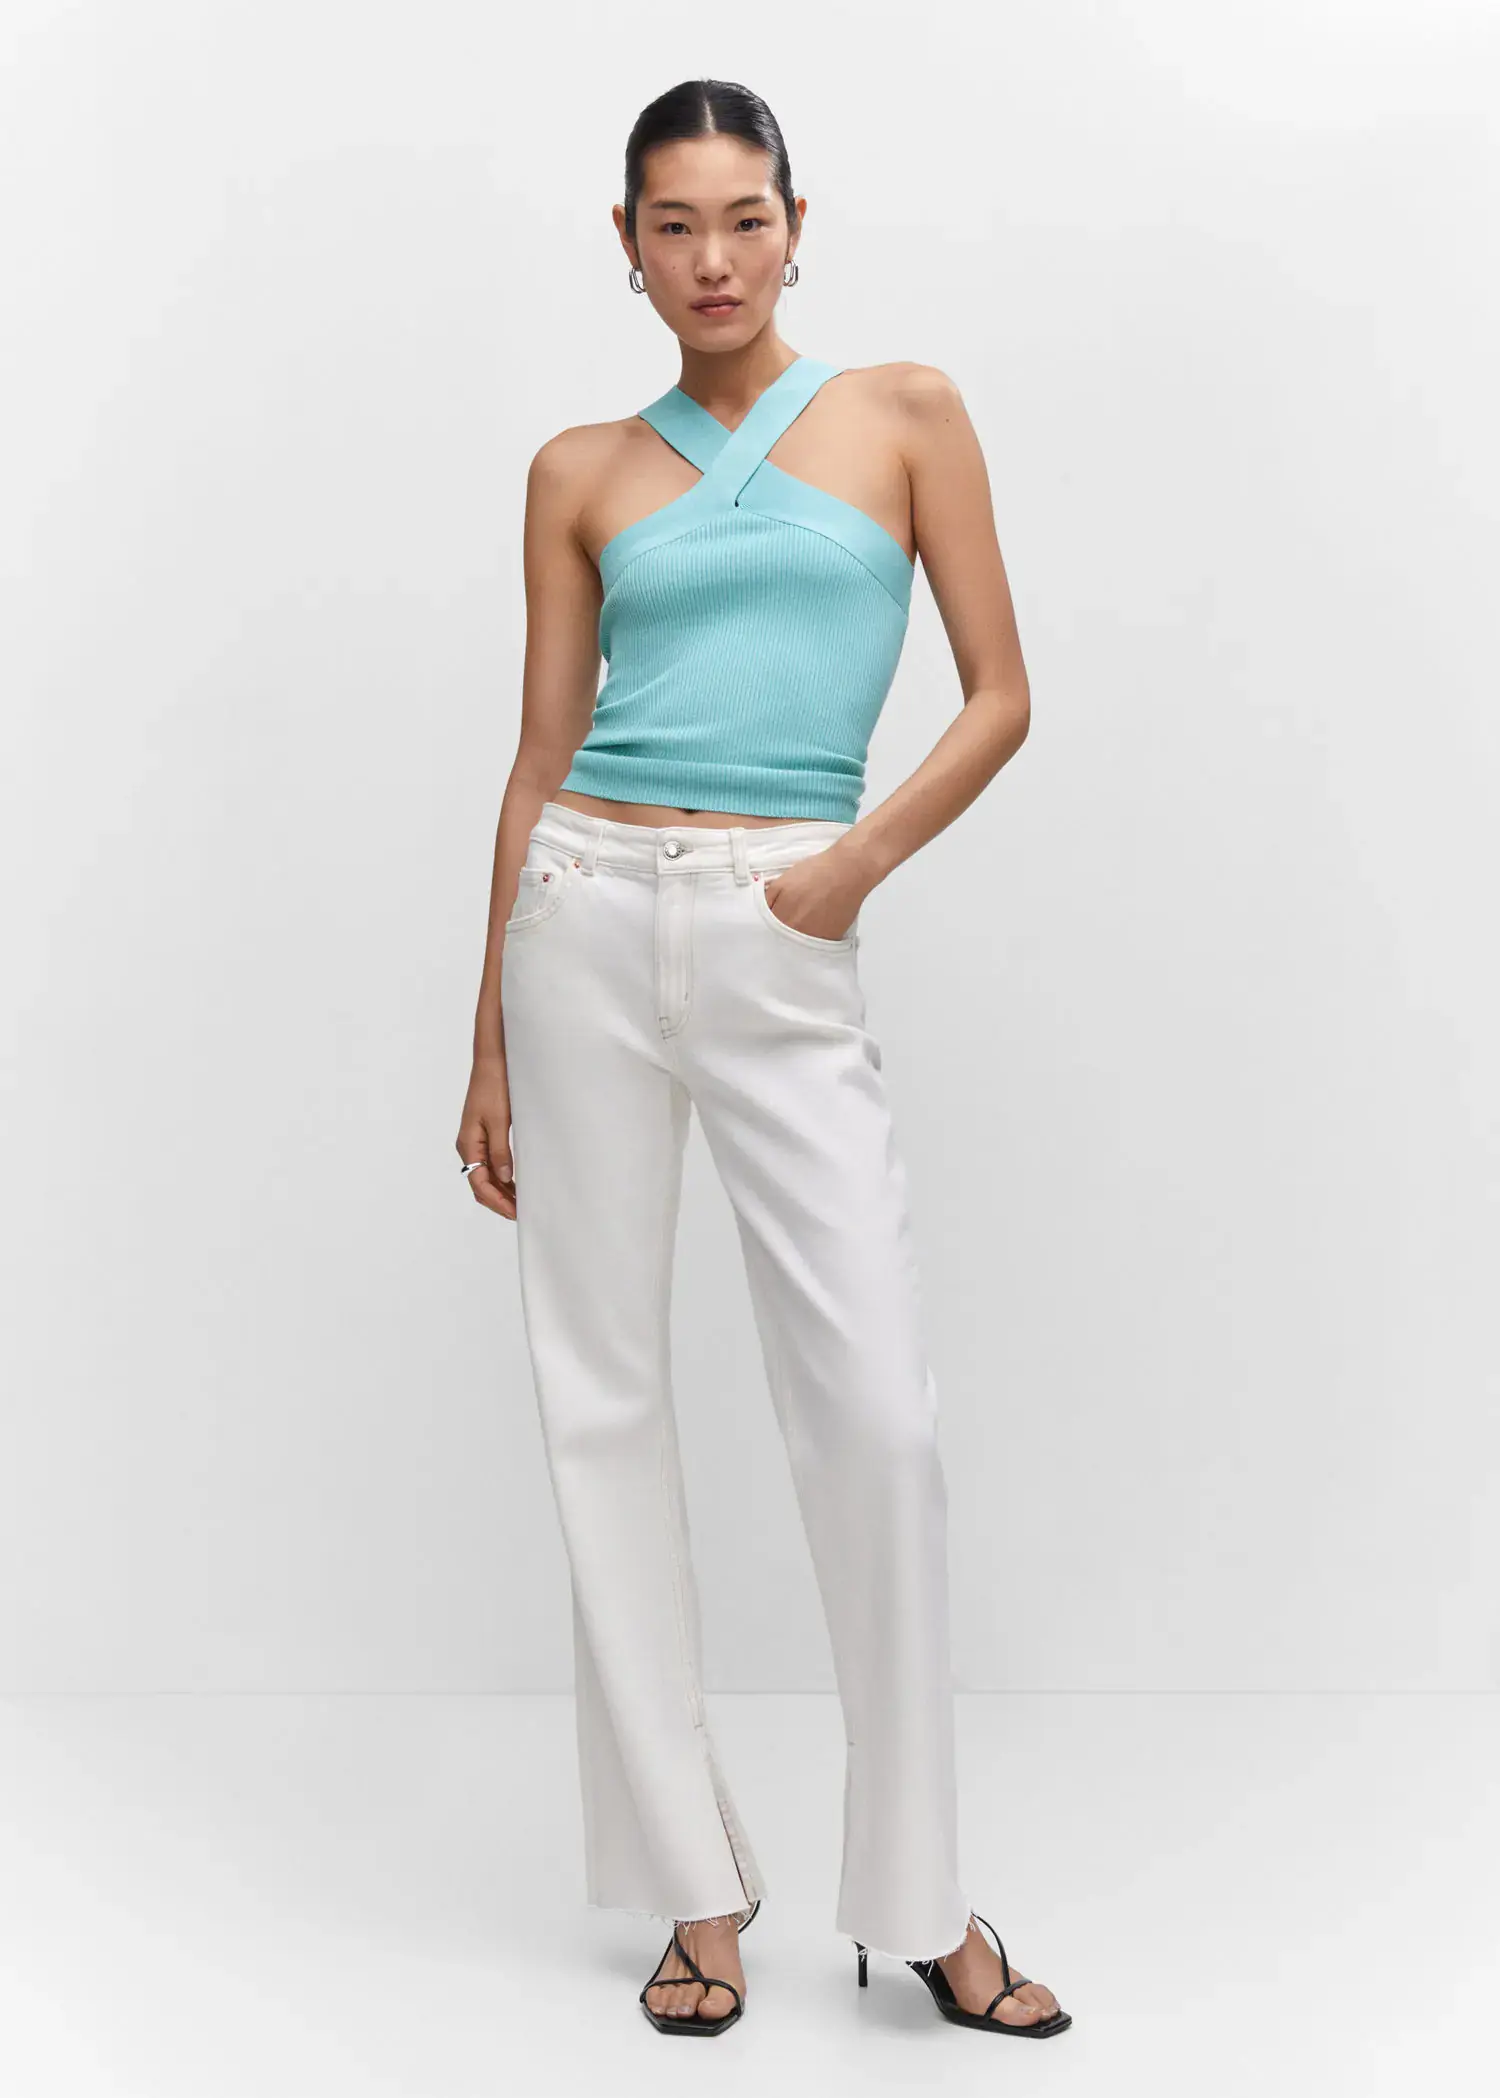 Mango Halter-neck knitted top. a woman wearing a blue top and white pants. 